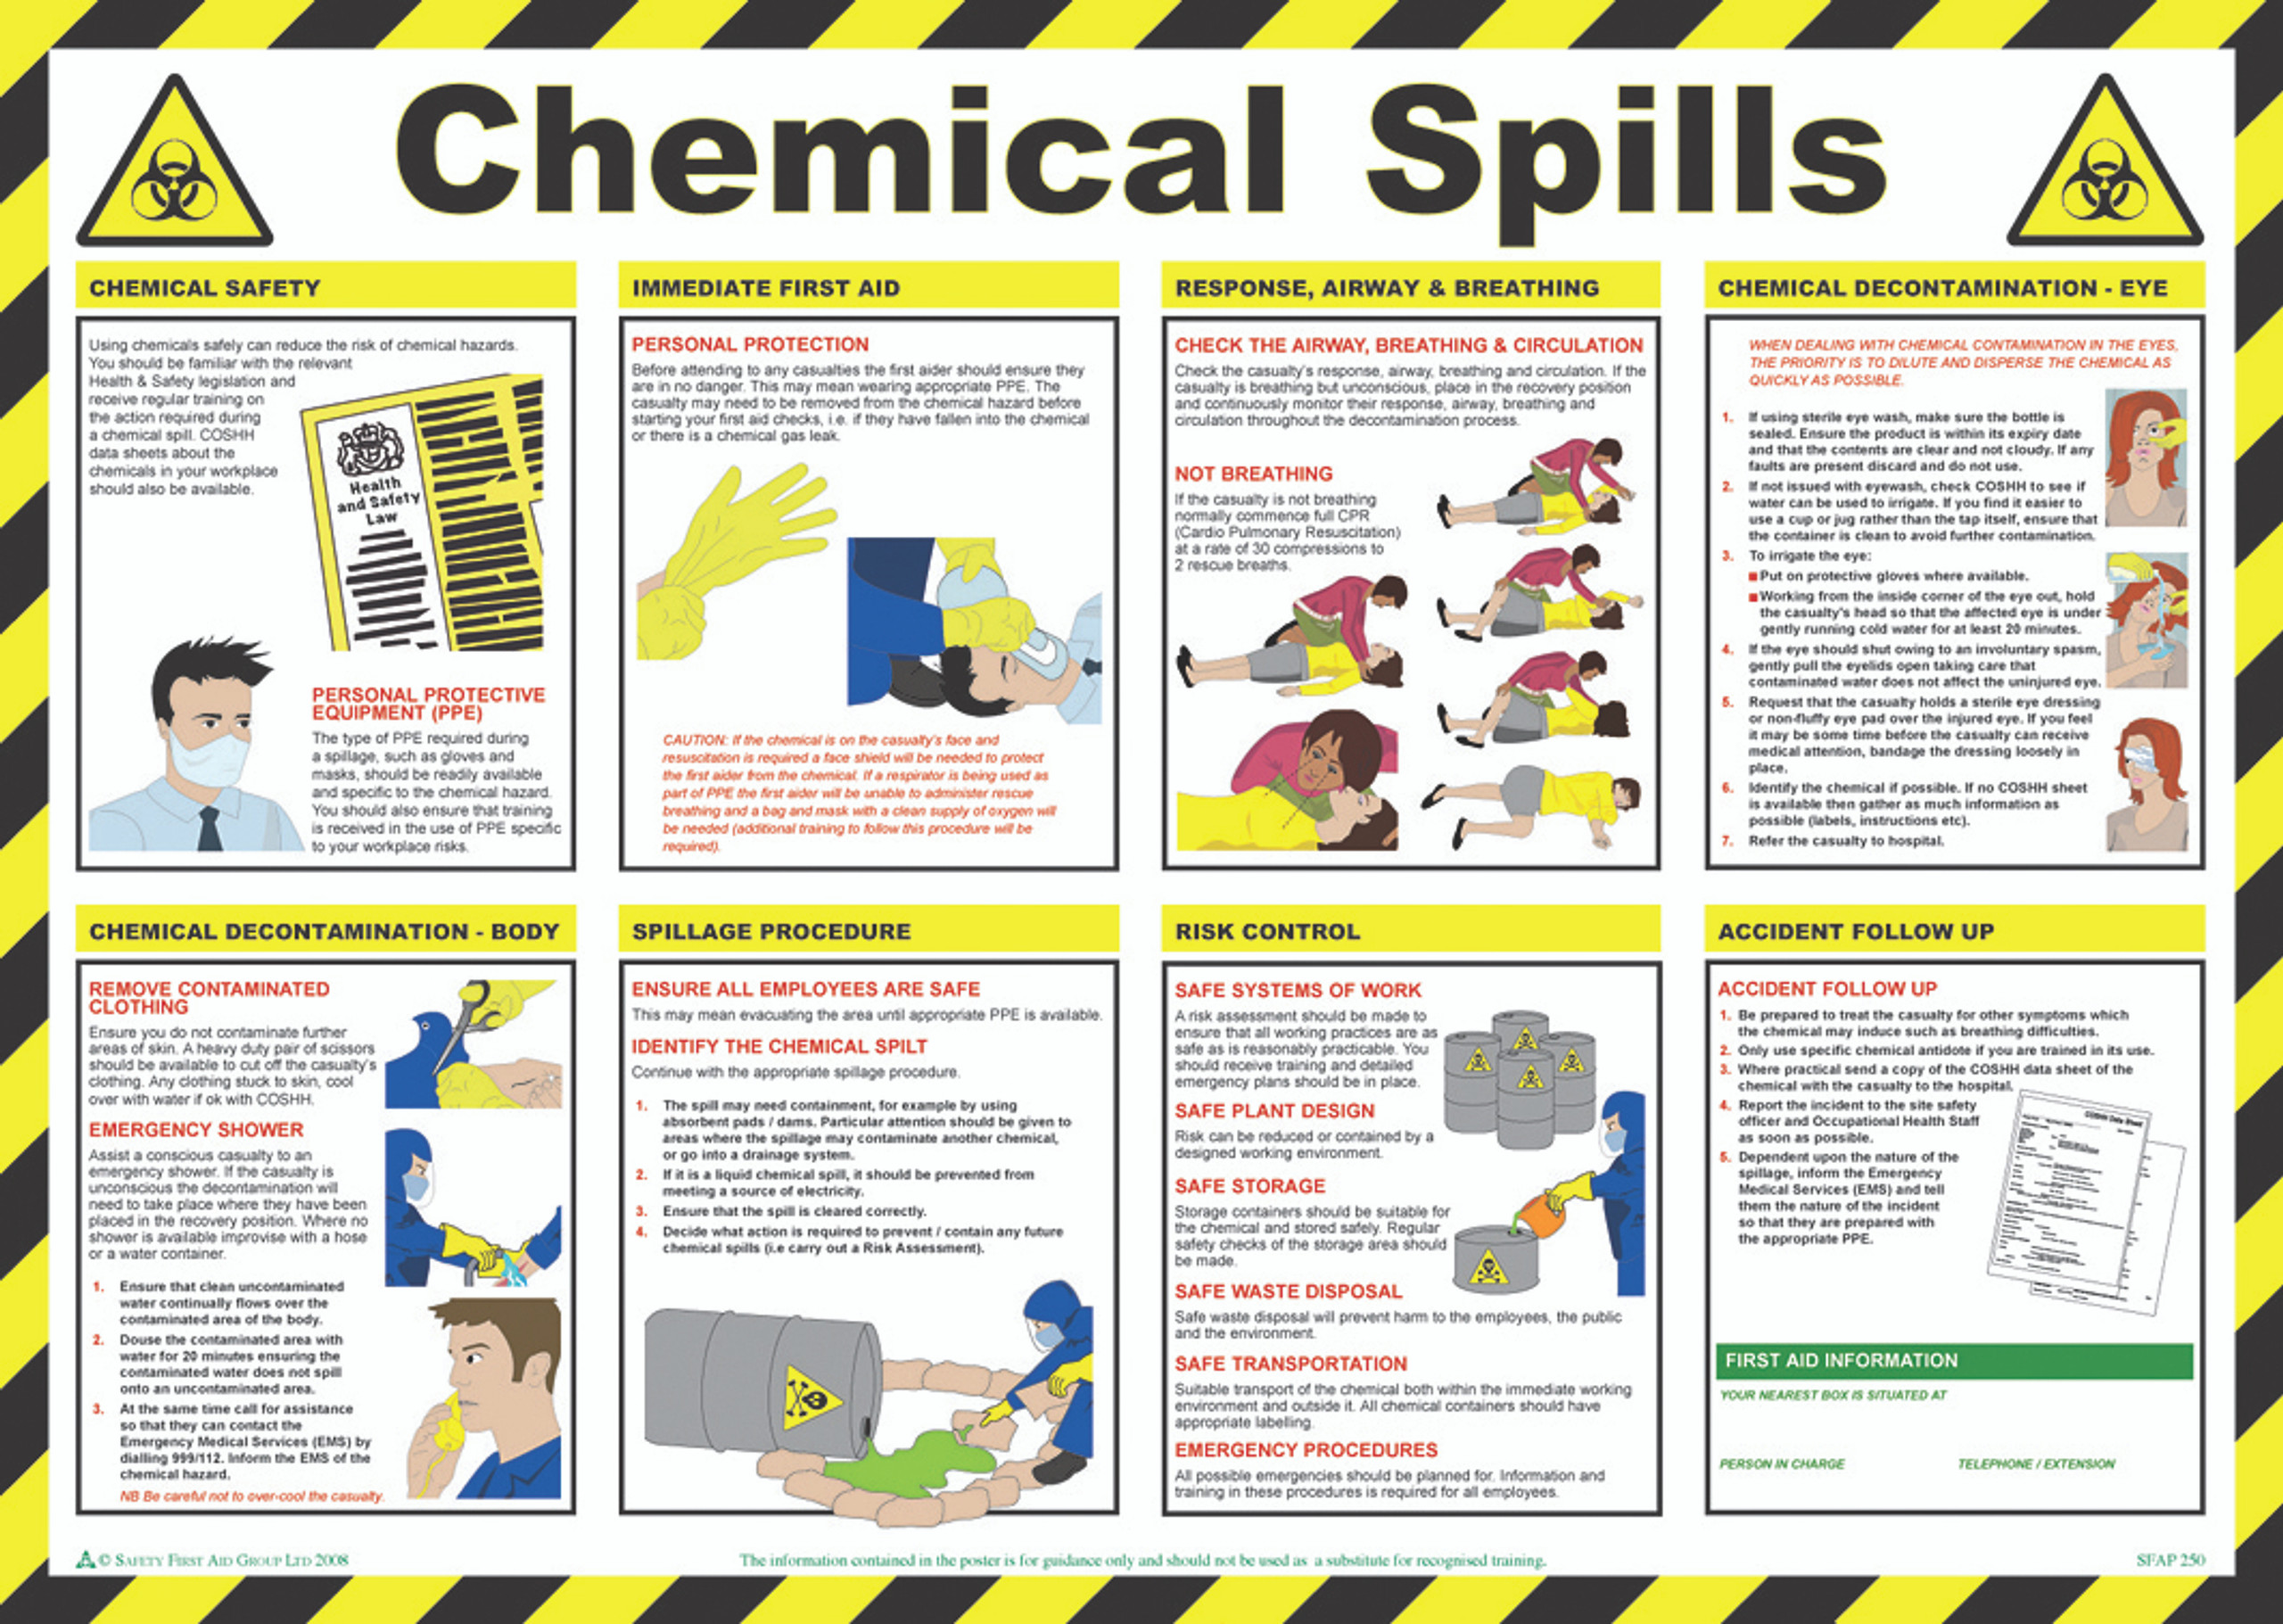 Chemical Spills safety poster